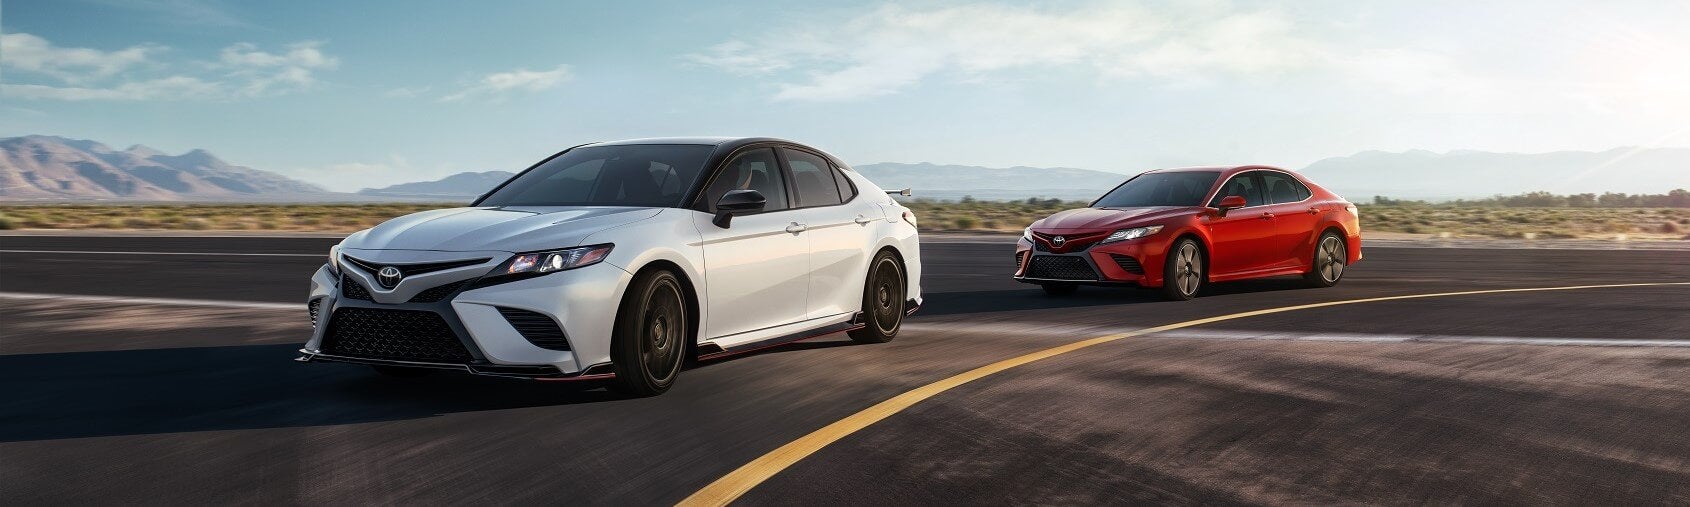 Toyota Camry Trim Levels Florence SC | Florence Toyota